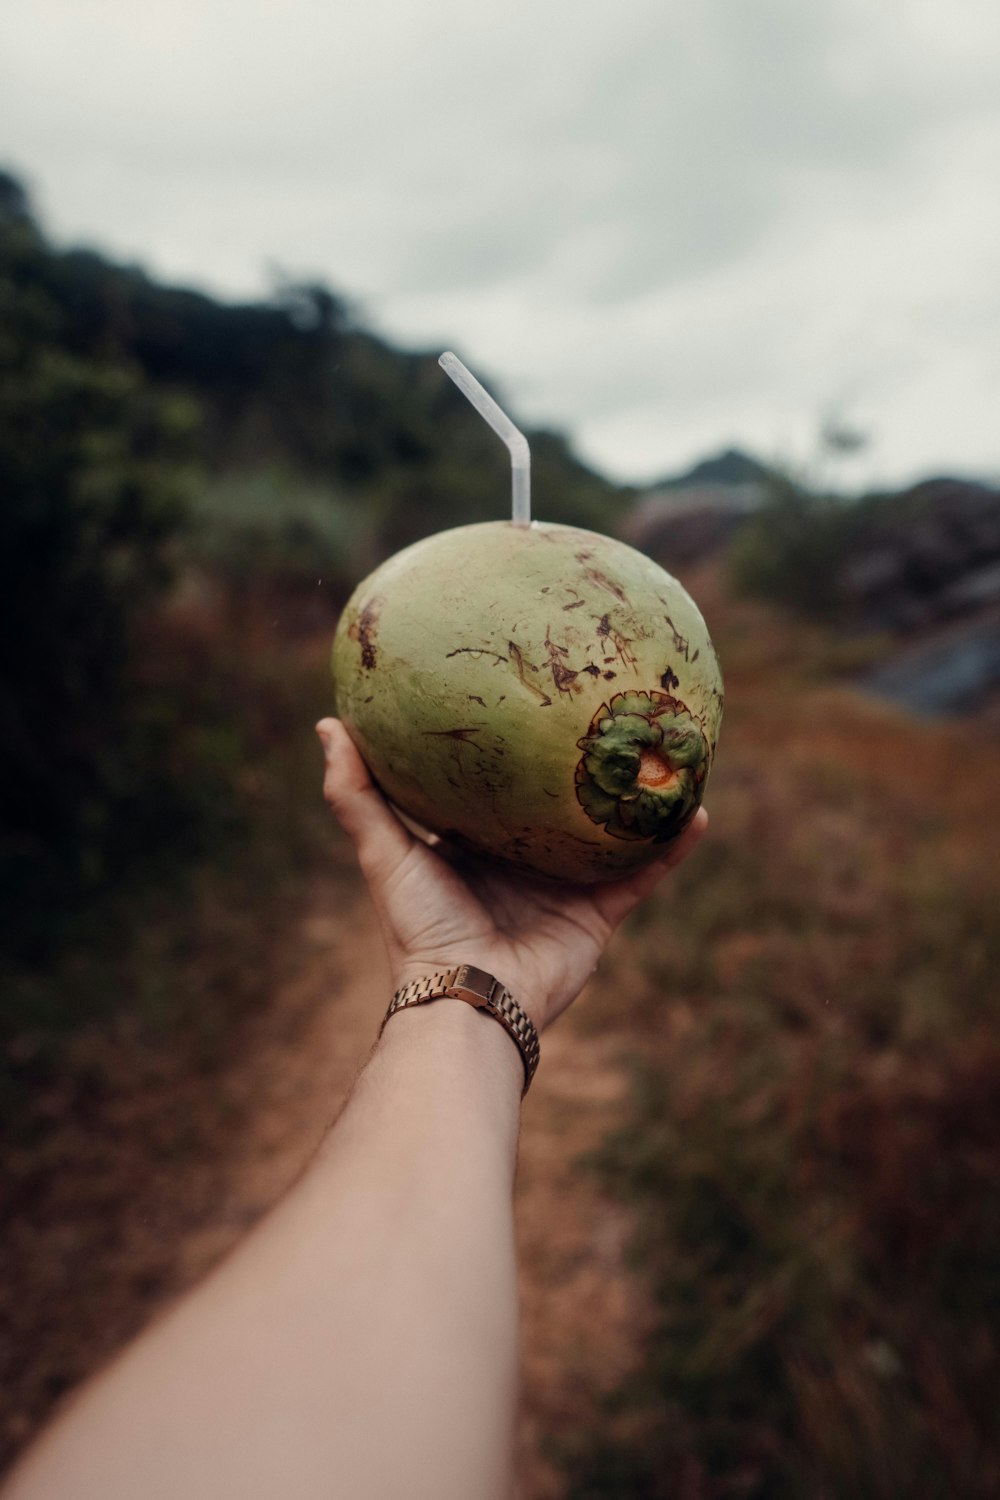 person holding coconut fruit during daytime